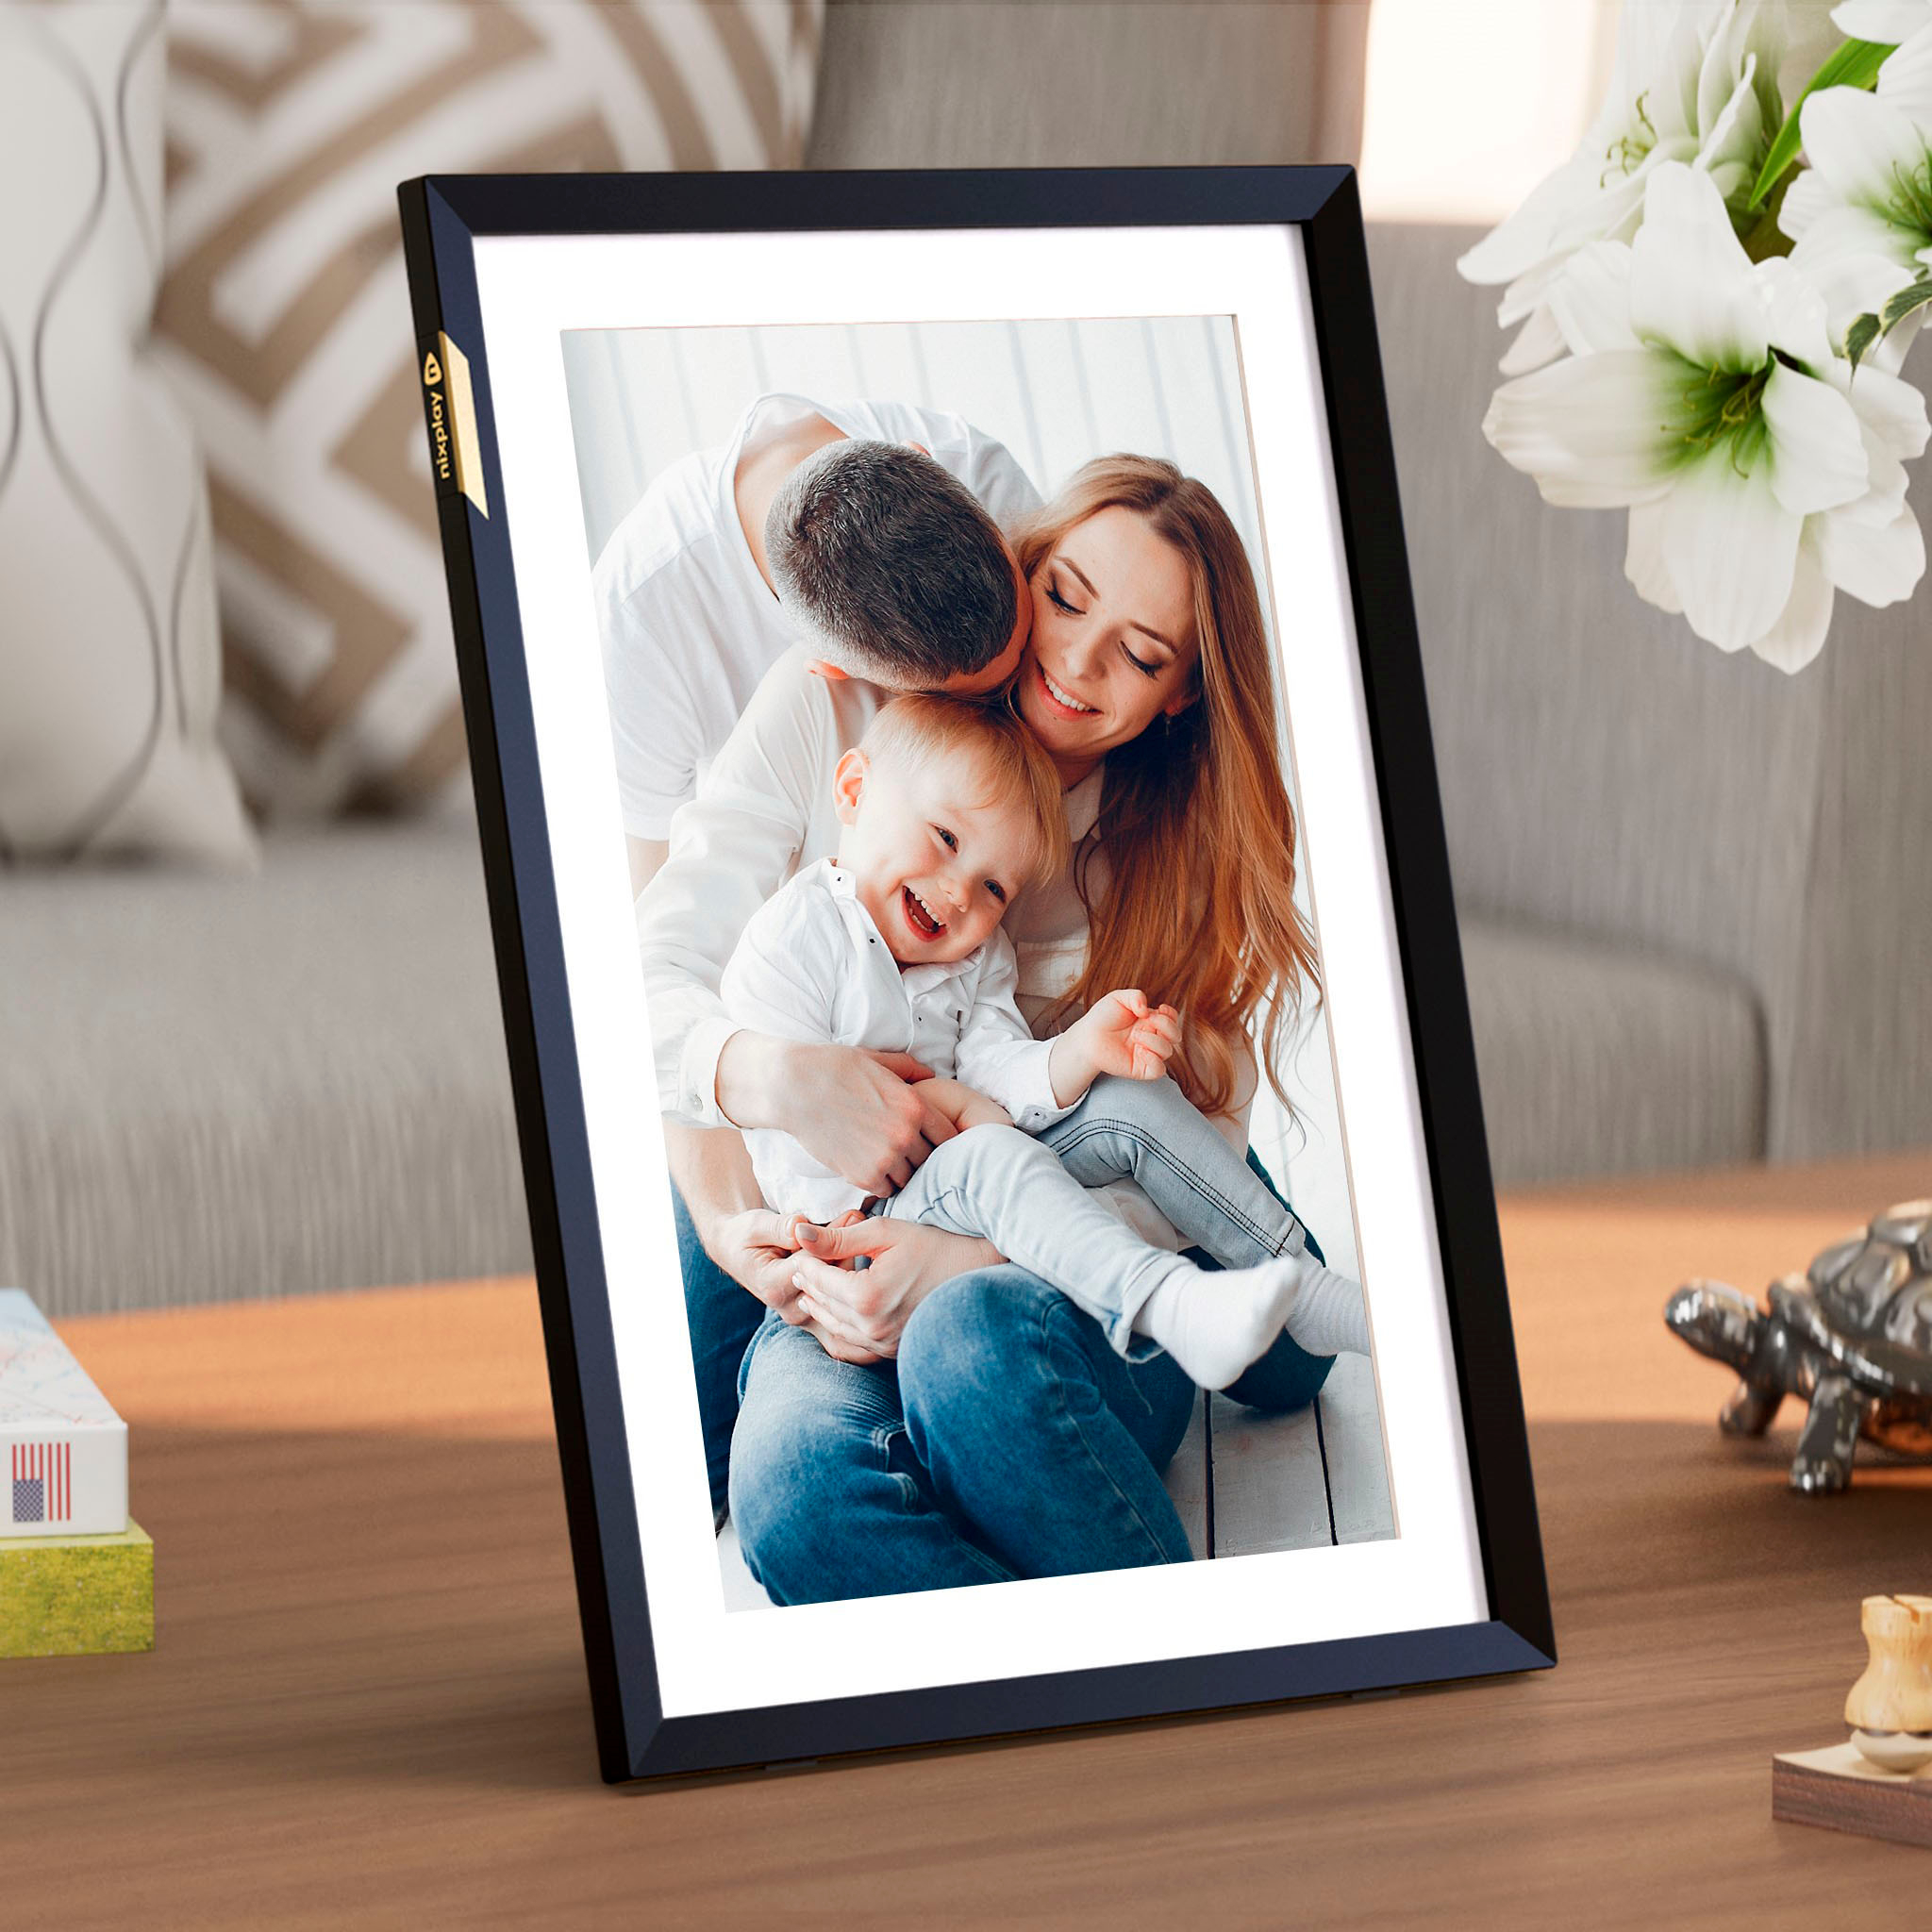 Left View: Nixplay - W10P Touch Classic 10.1-inch LCD Smart Digital Photo Frame - Black - Classic Matte